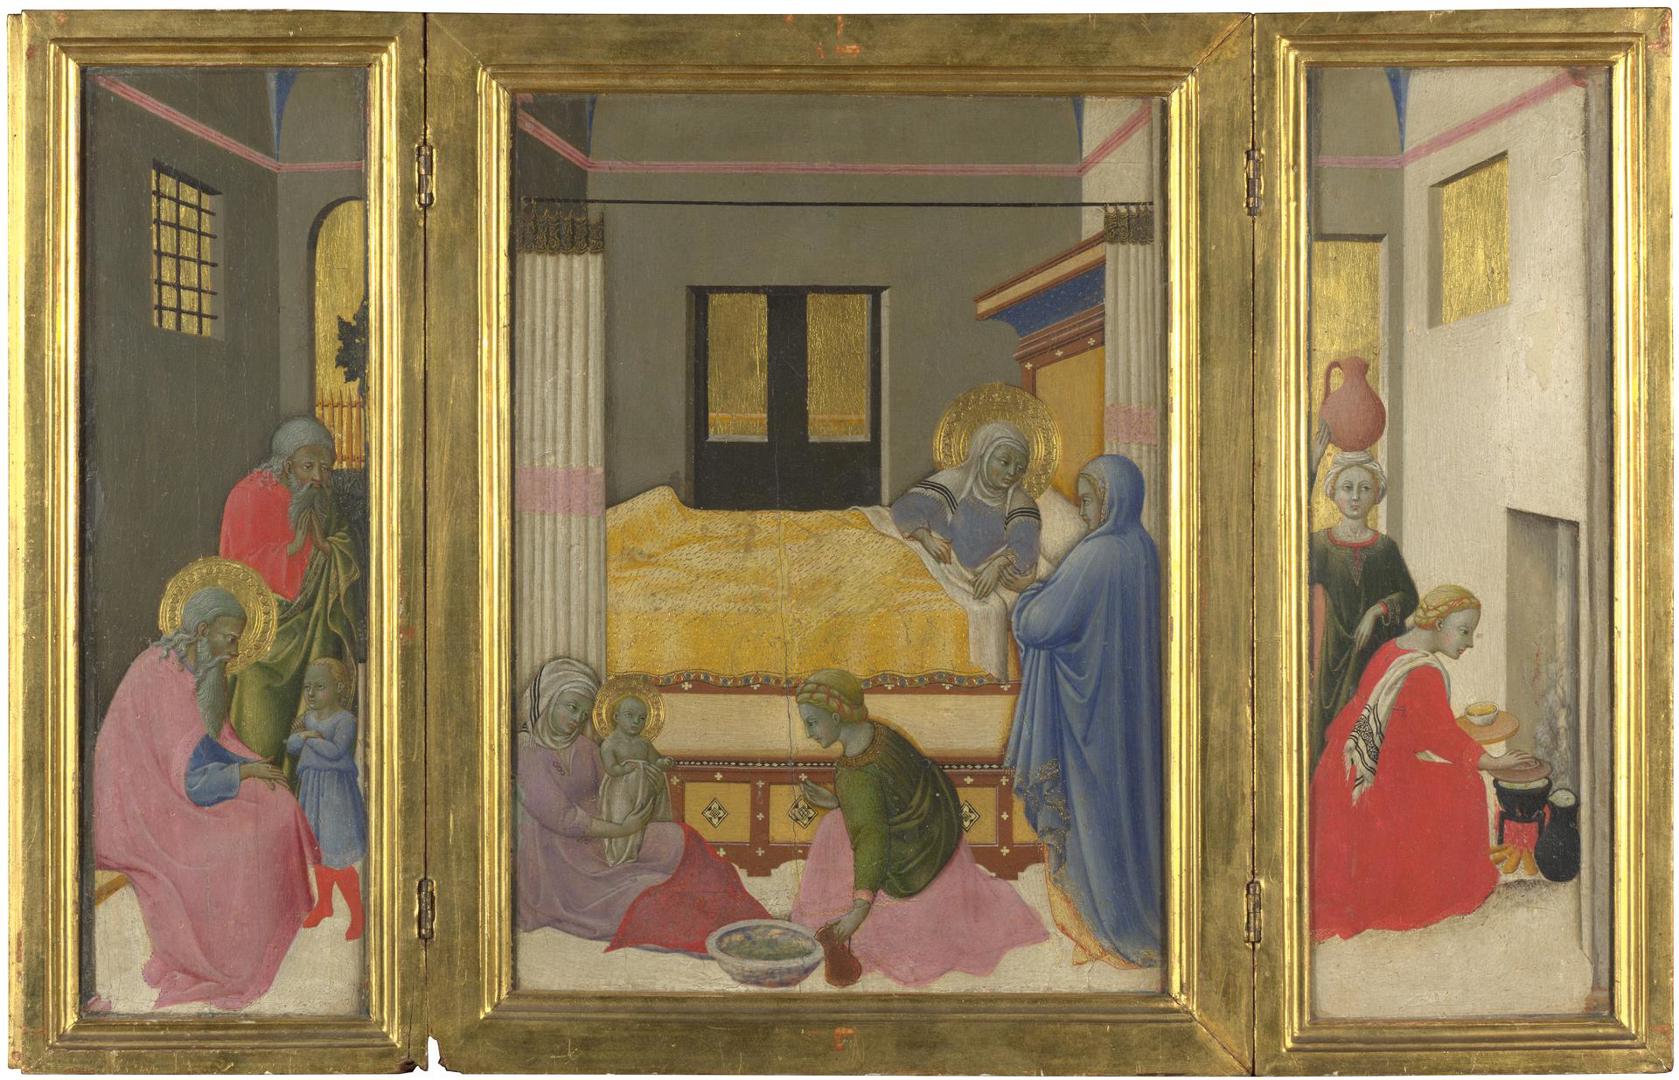 The Birth of the Virgin by Master of the Osservanza